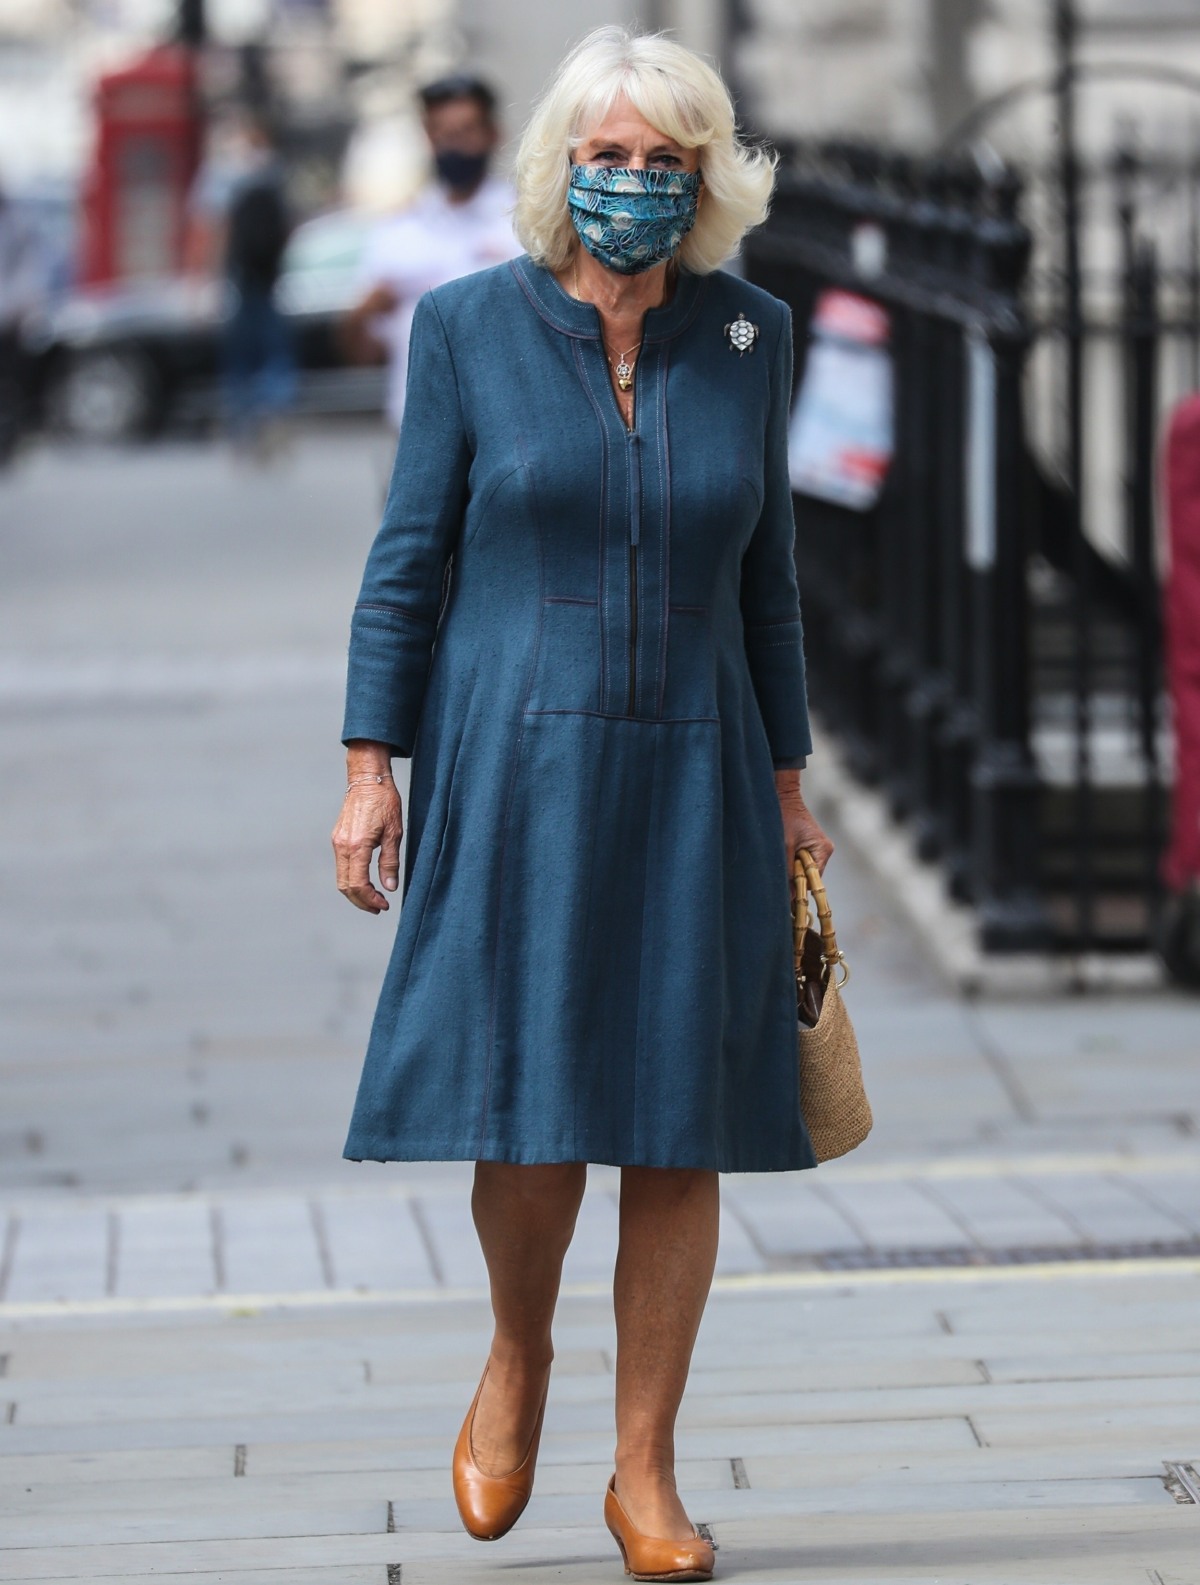 Camilla, the Duchess of Cornwall visits the National Gallery in London.